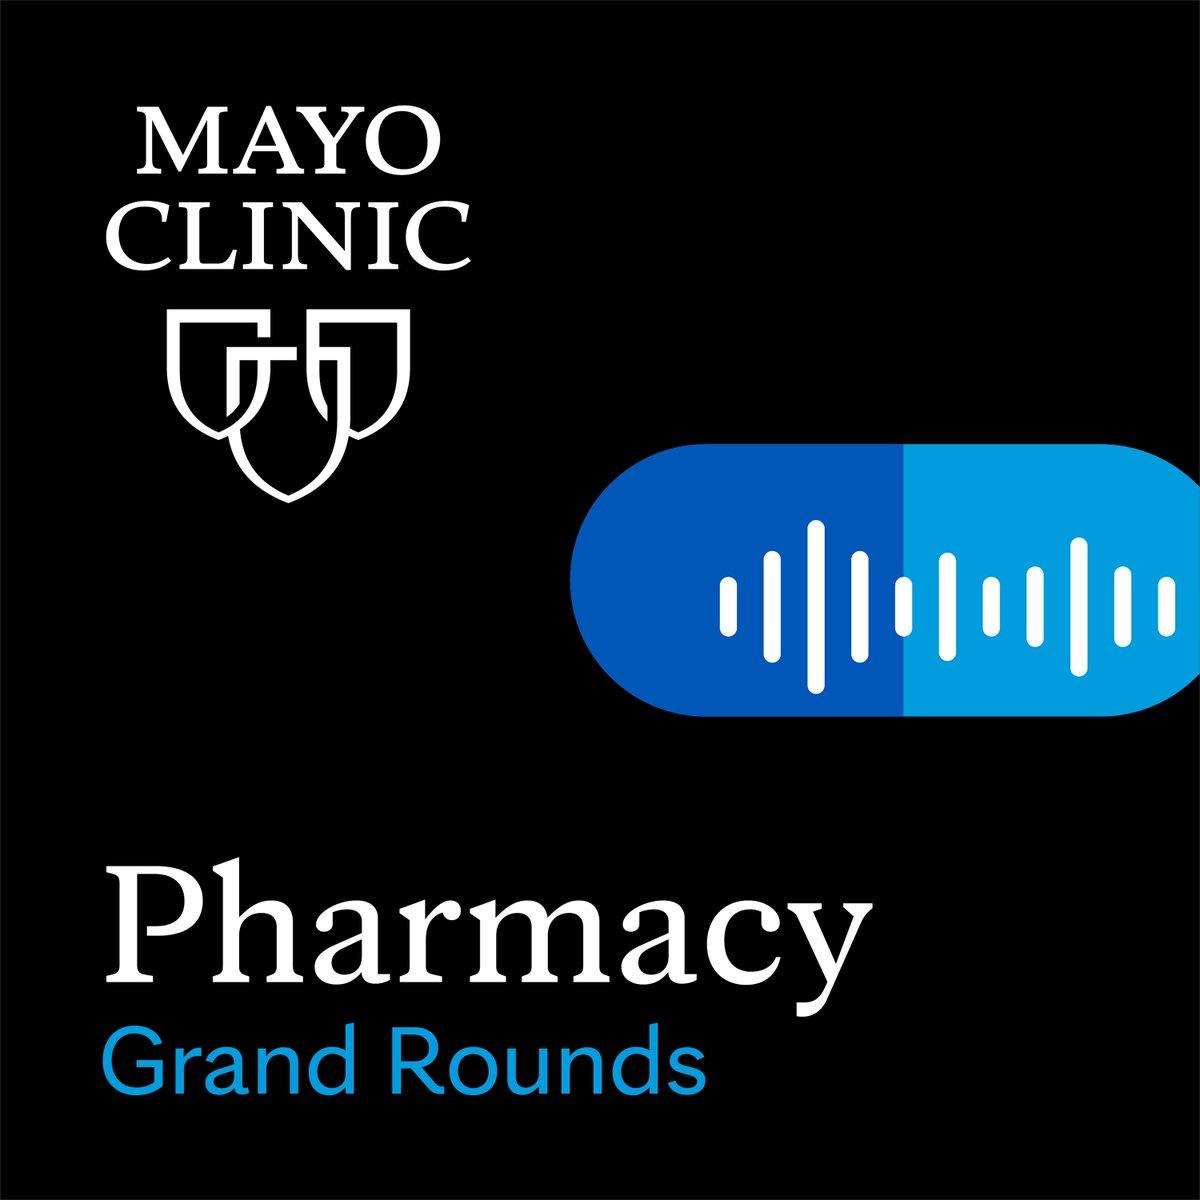 Subscribe now to the Mayo Clinic Pharmacy Grand Rounds podcast! This offer provides a year of on-demand access for #healthcare providers to view and claim unlimited credit for current and upcoming weekly series episodes. @MayoPharmRes #TwitteRx mayocl.in/3TxXgfy